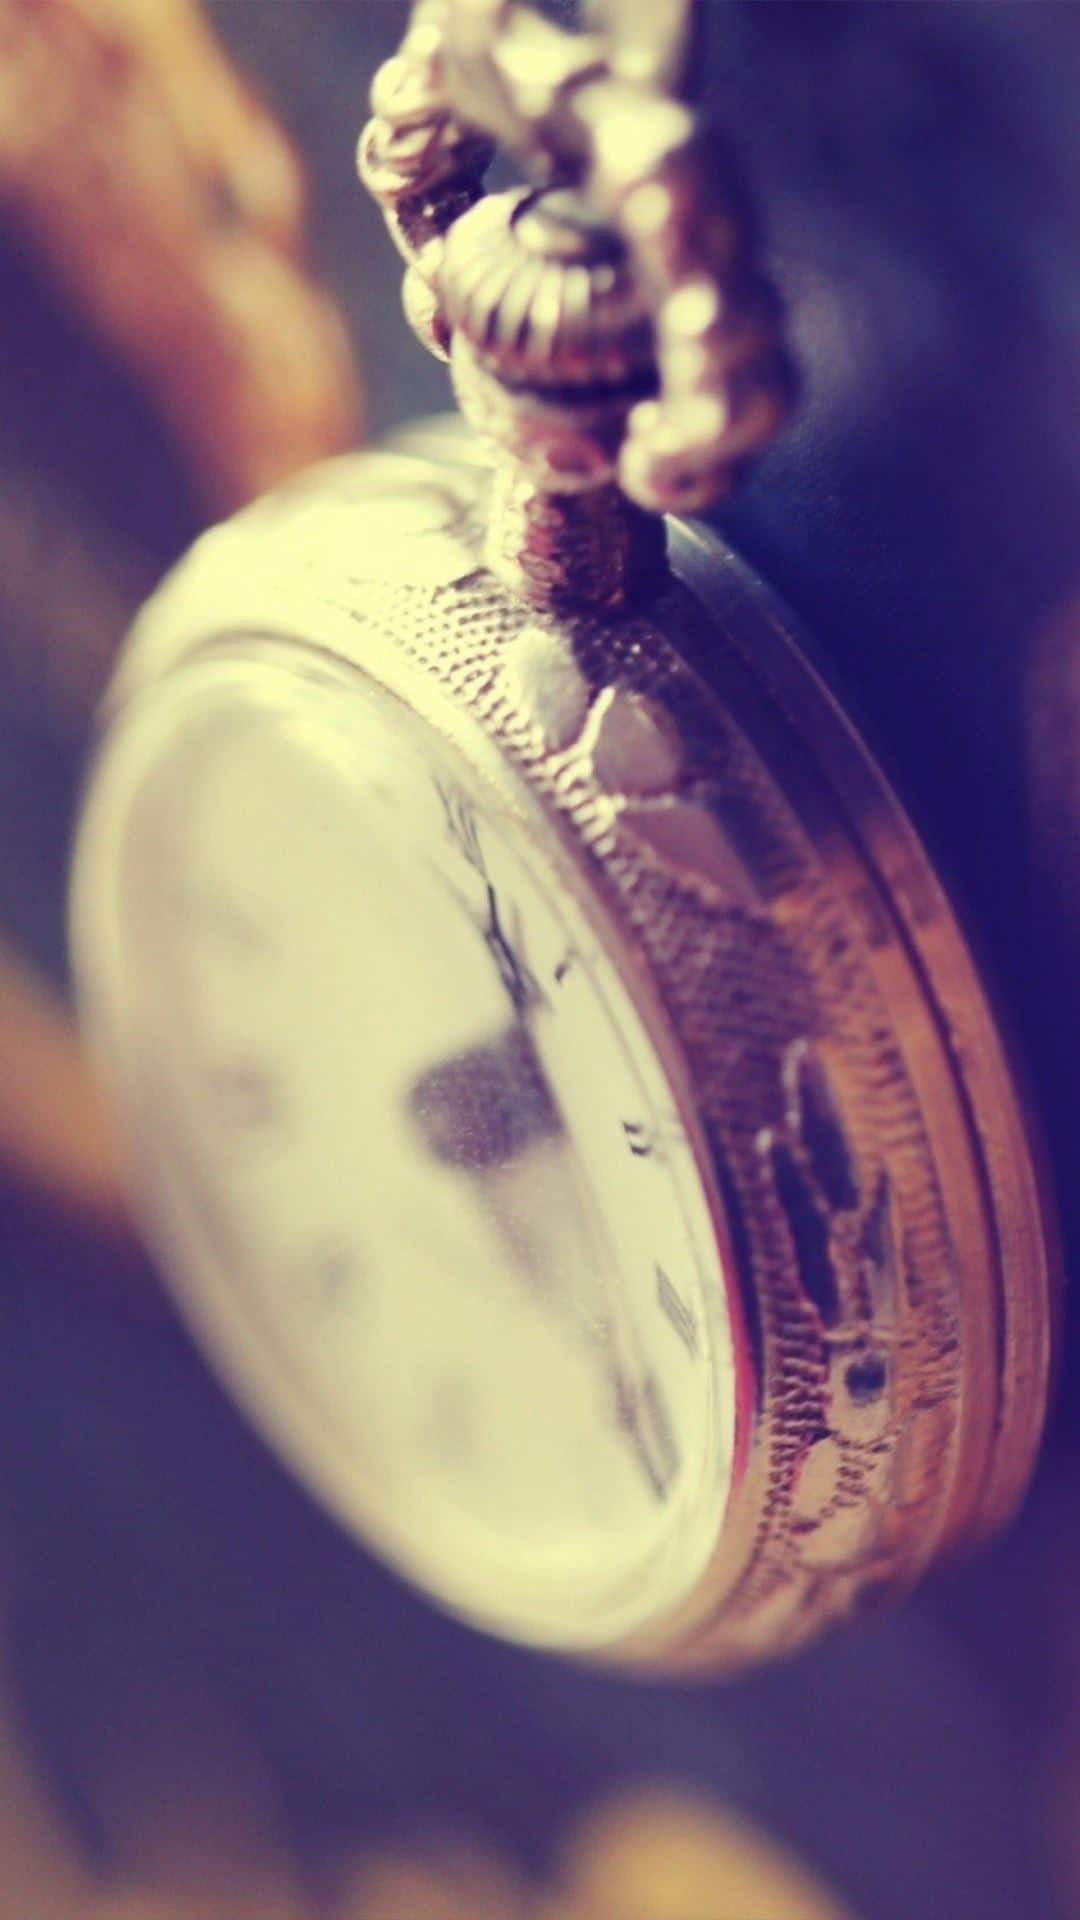 Antique Pocket Watch Android Wallpaper